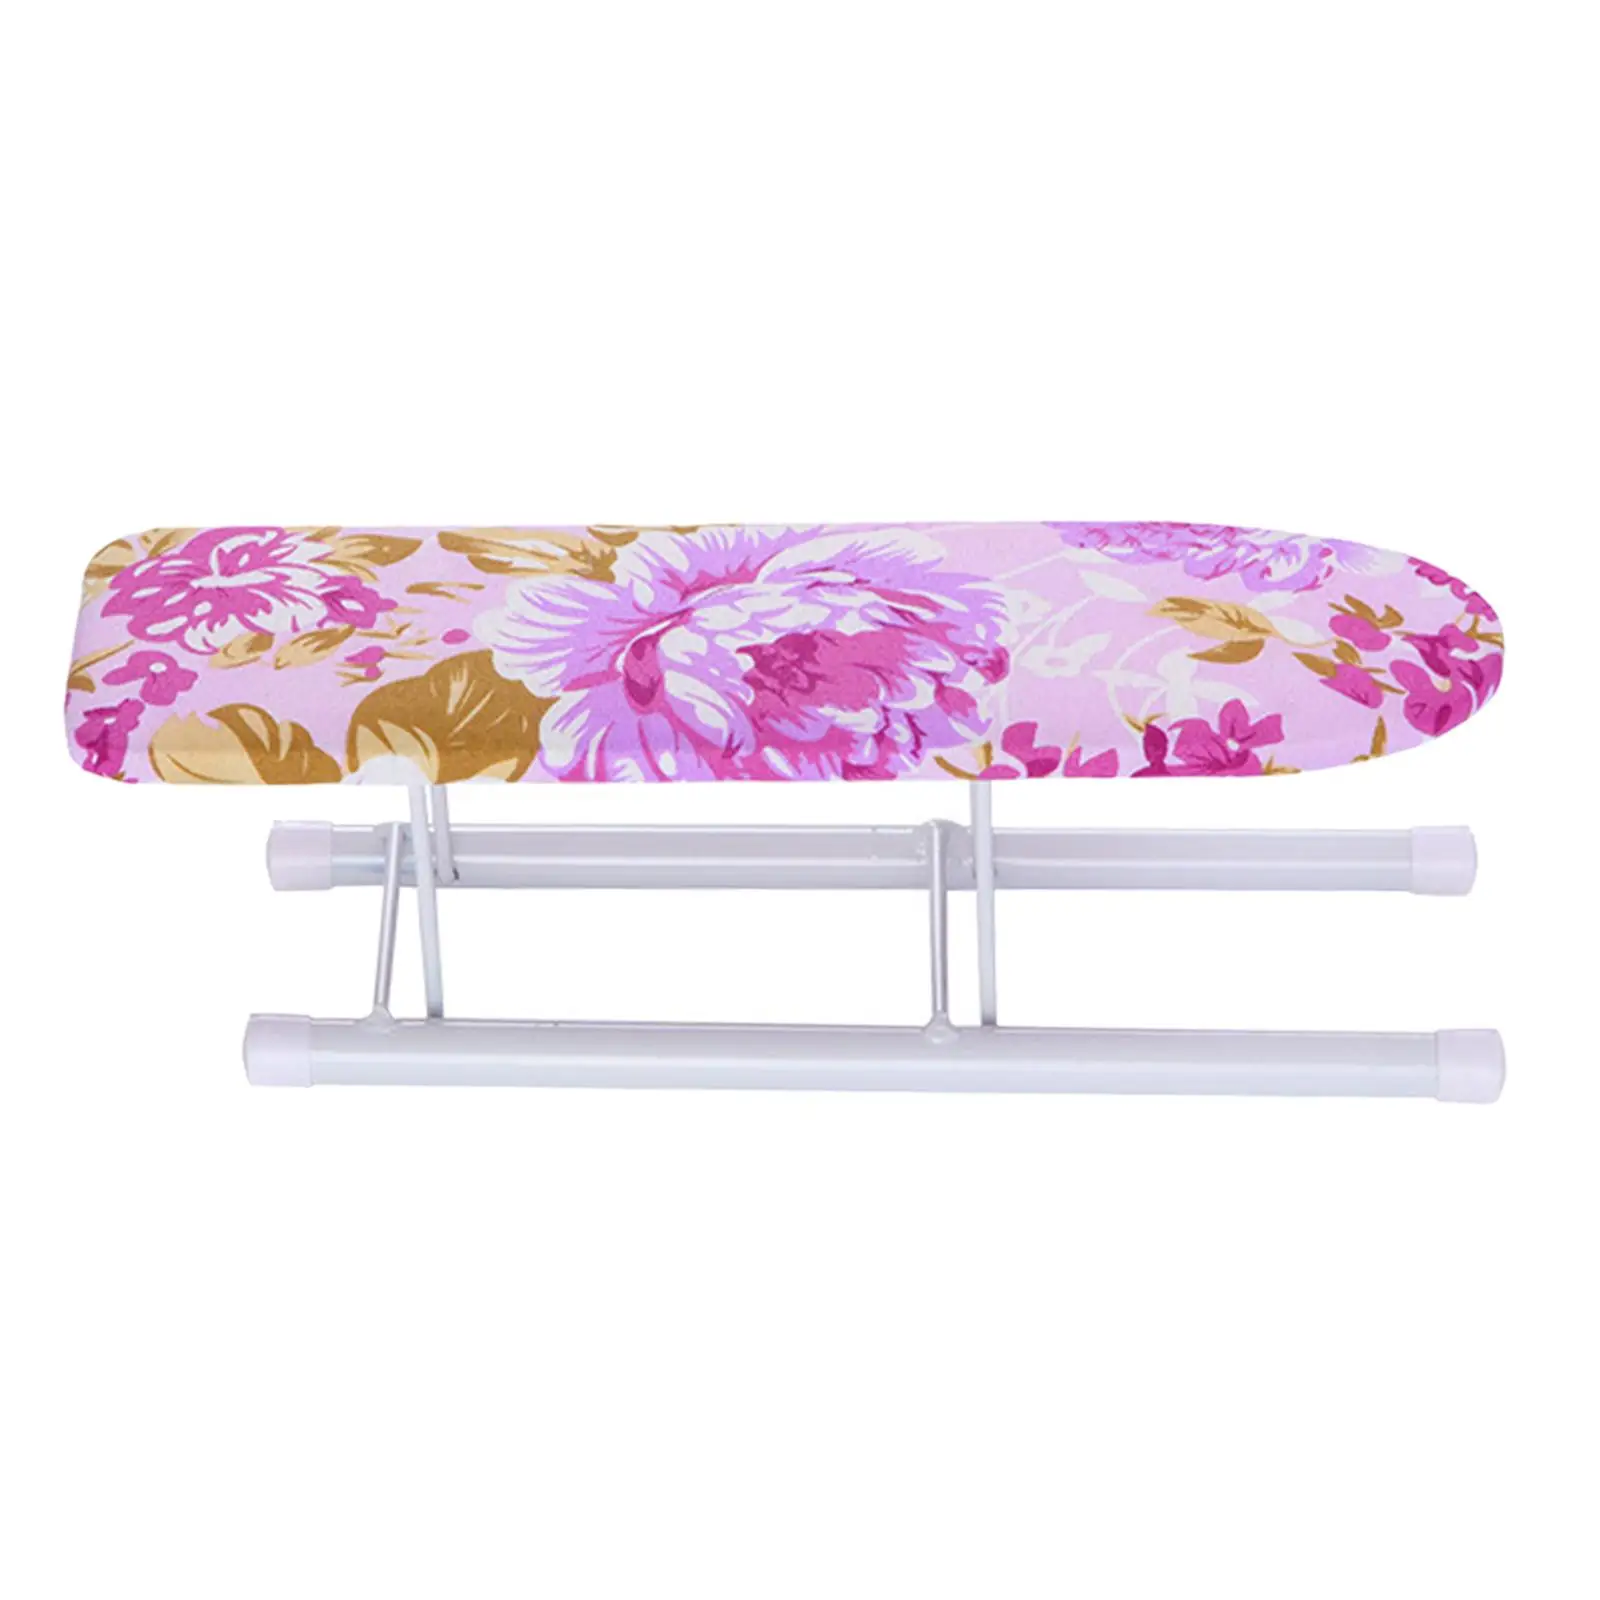 Mini Ironing Board Foldable Legs Non Slip Feet, Cuffs Collars Ironing Countertop Ironing Board for Apartment Travel Home